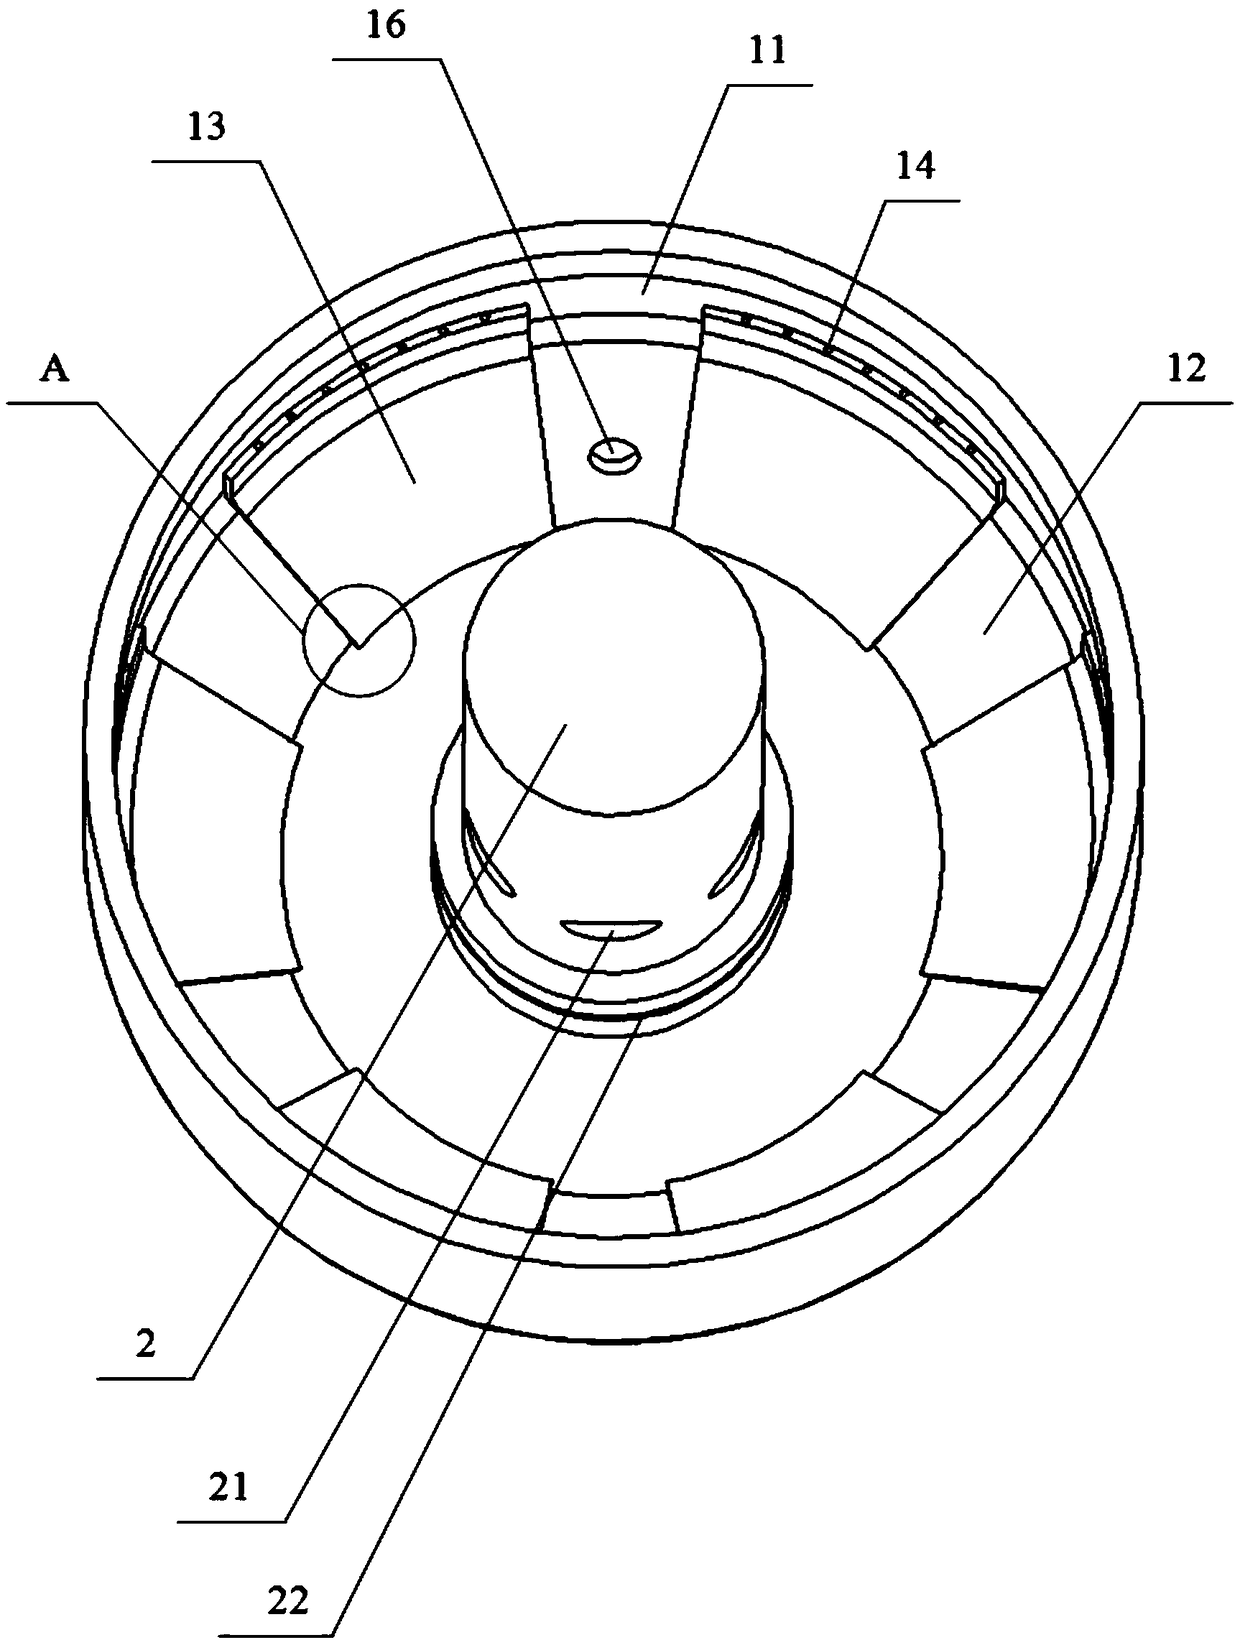 Oil collecting device for air compressor safety valve